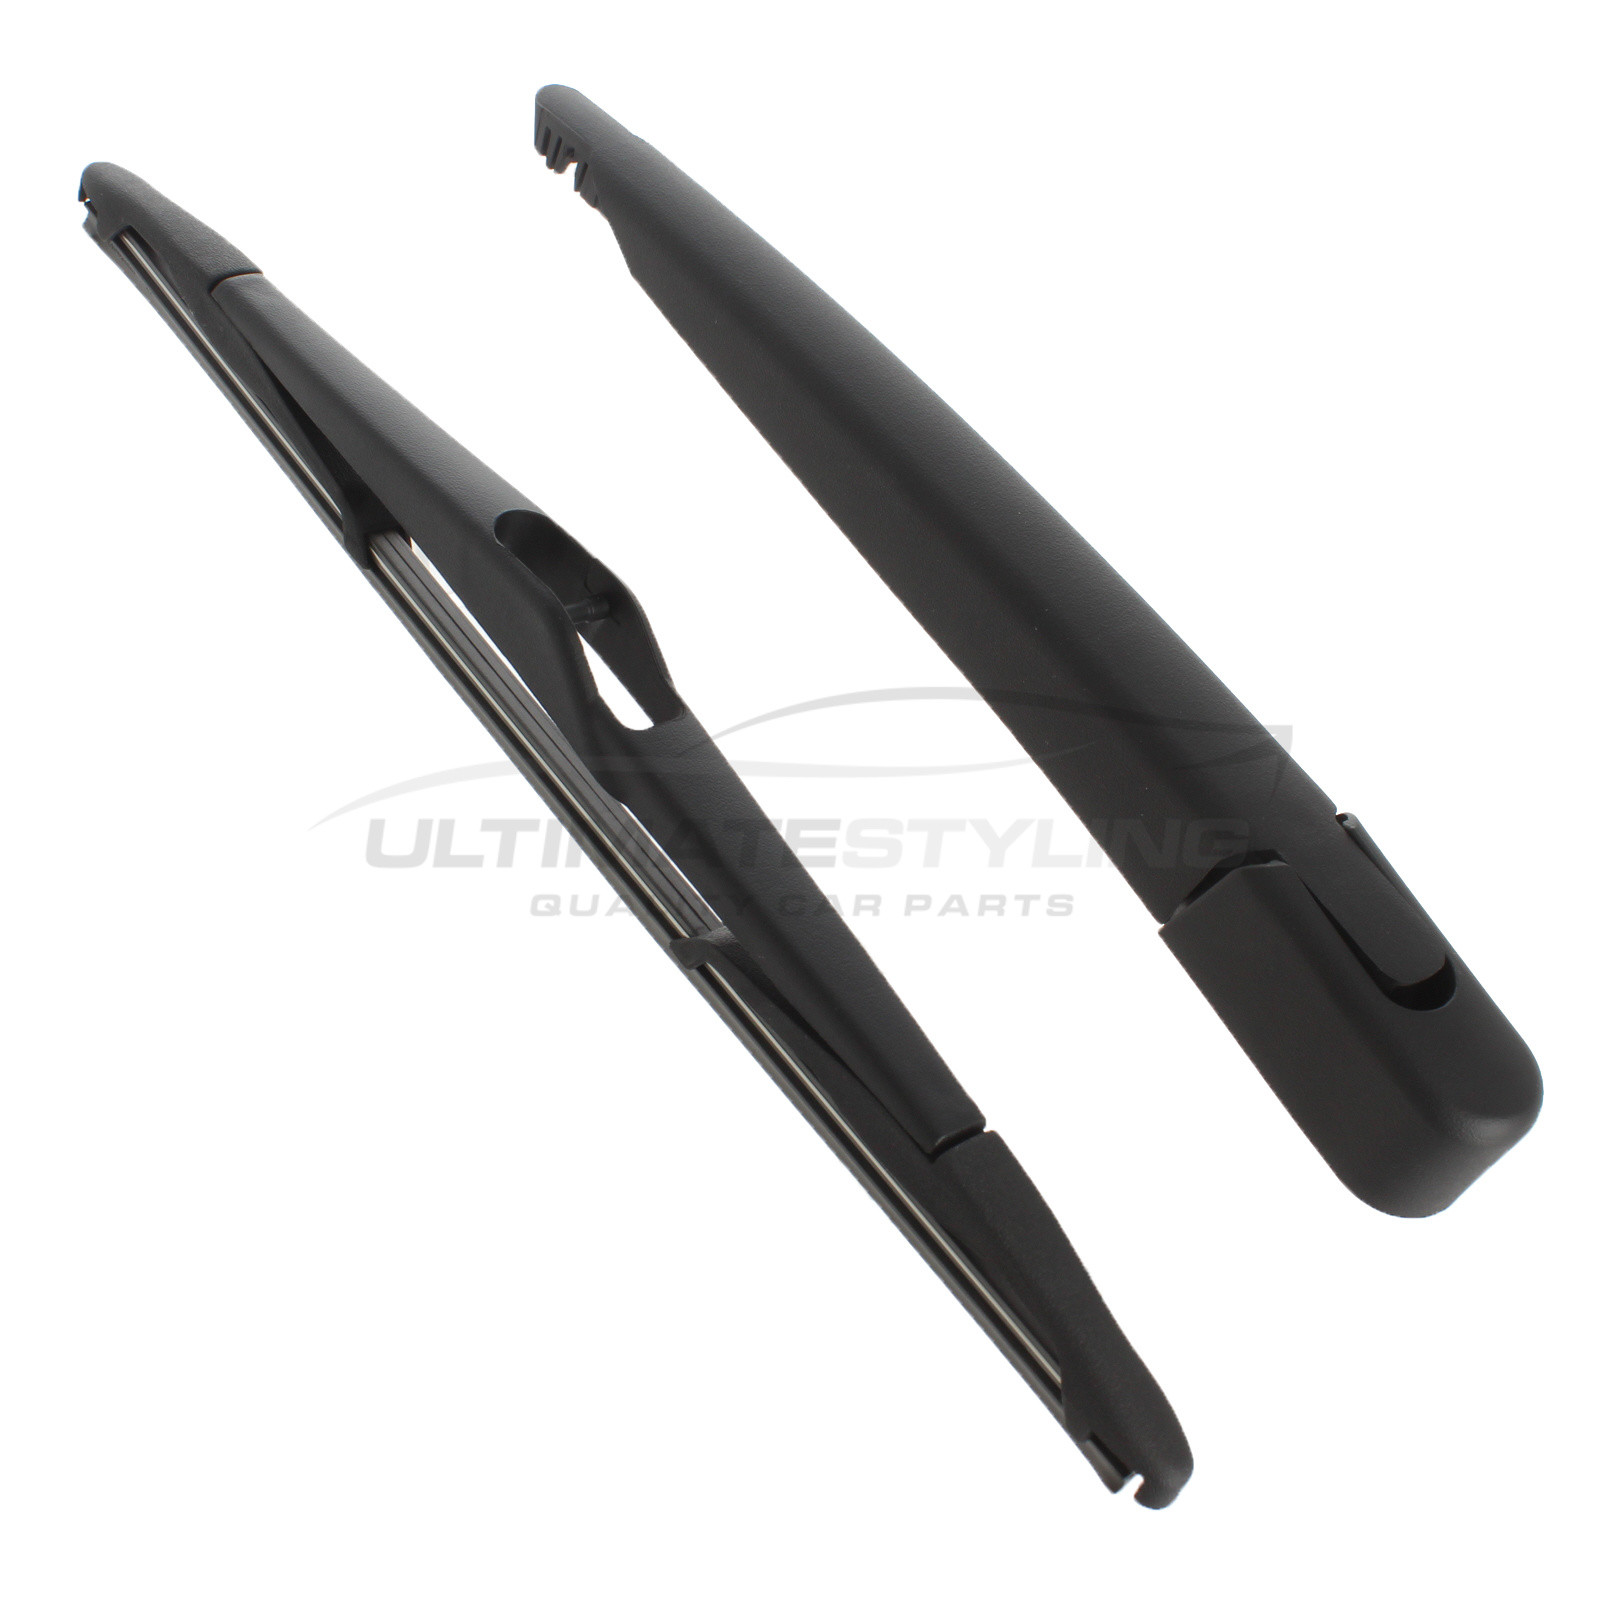 Rear Wiper Arm & Blade Set for Renault Scenic